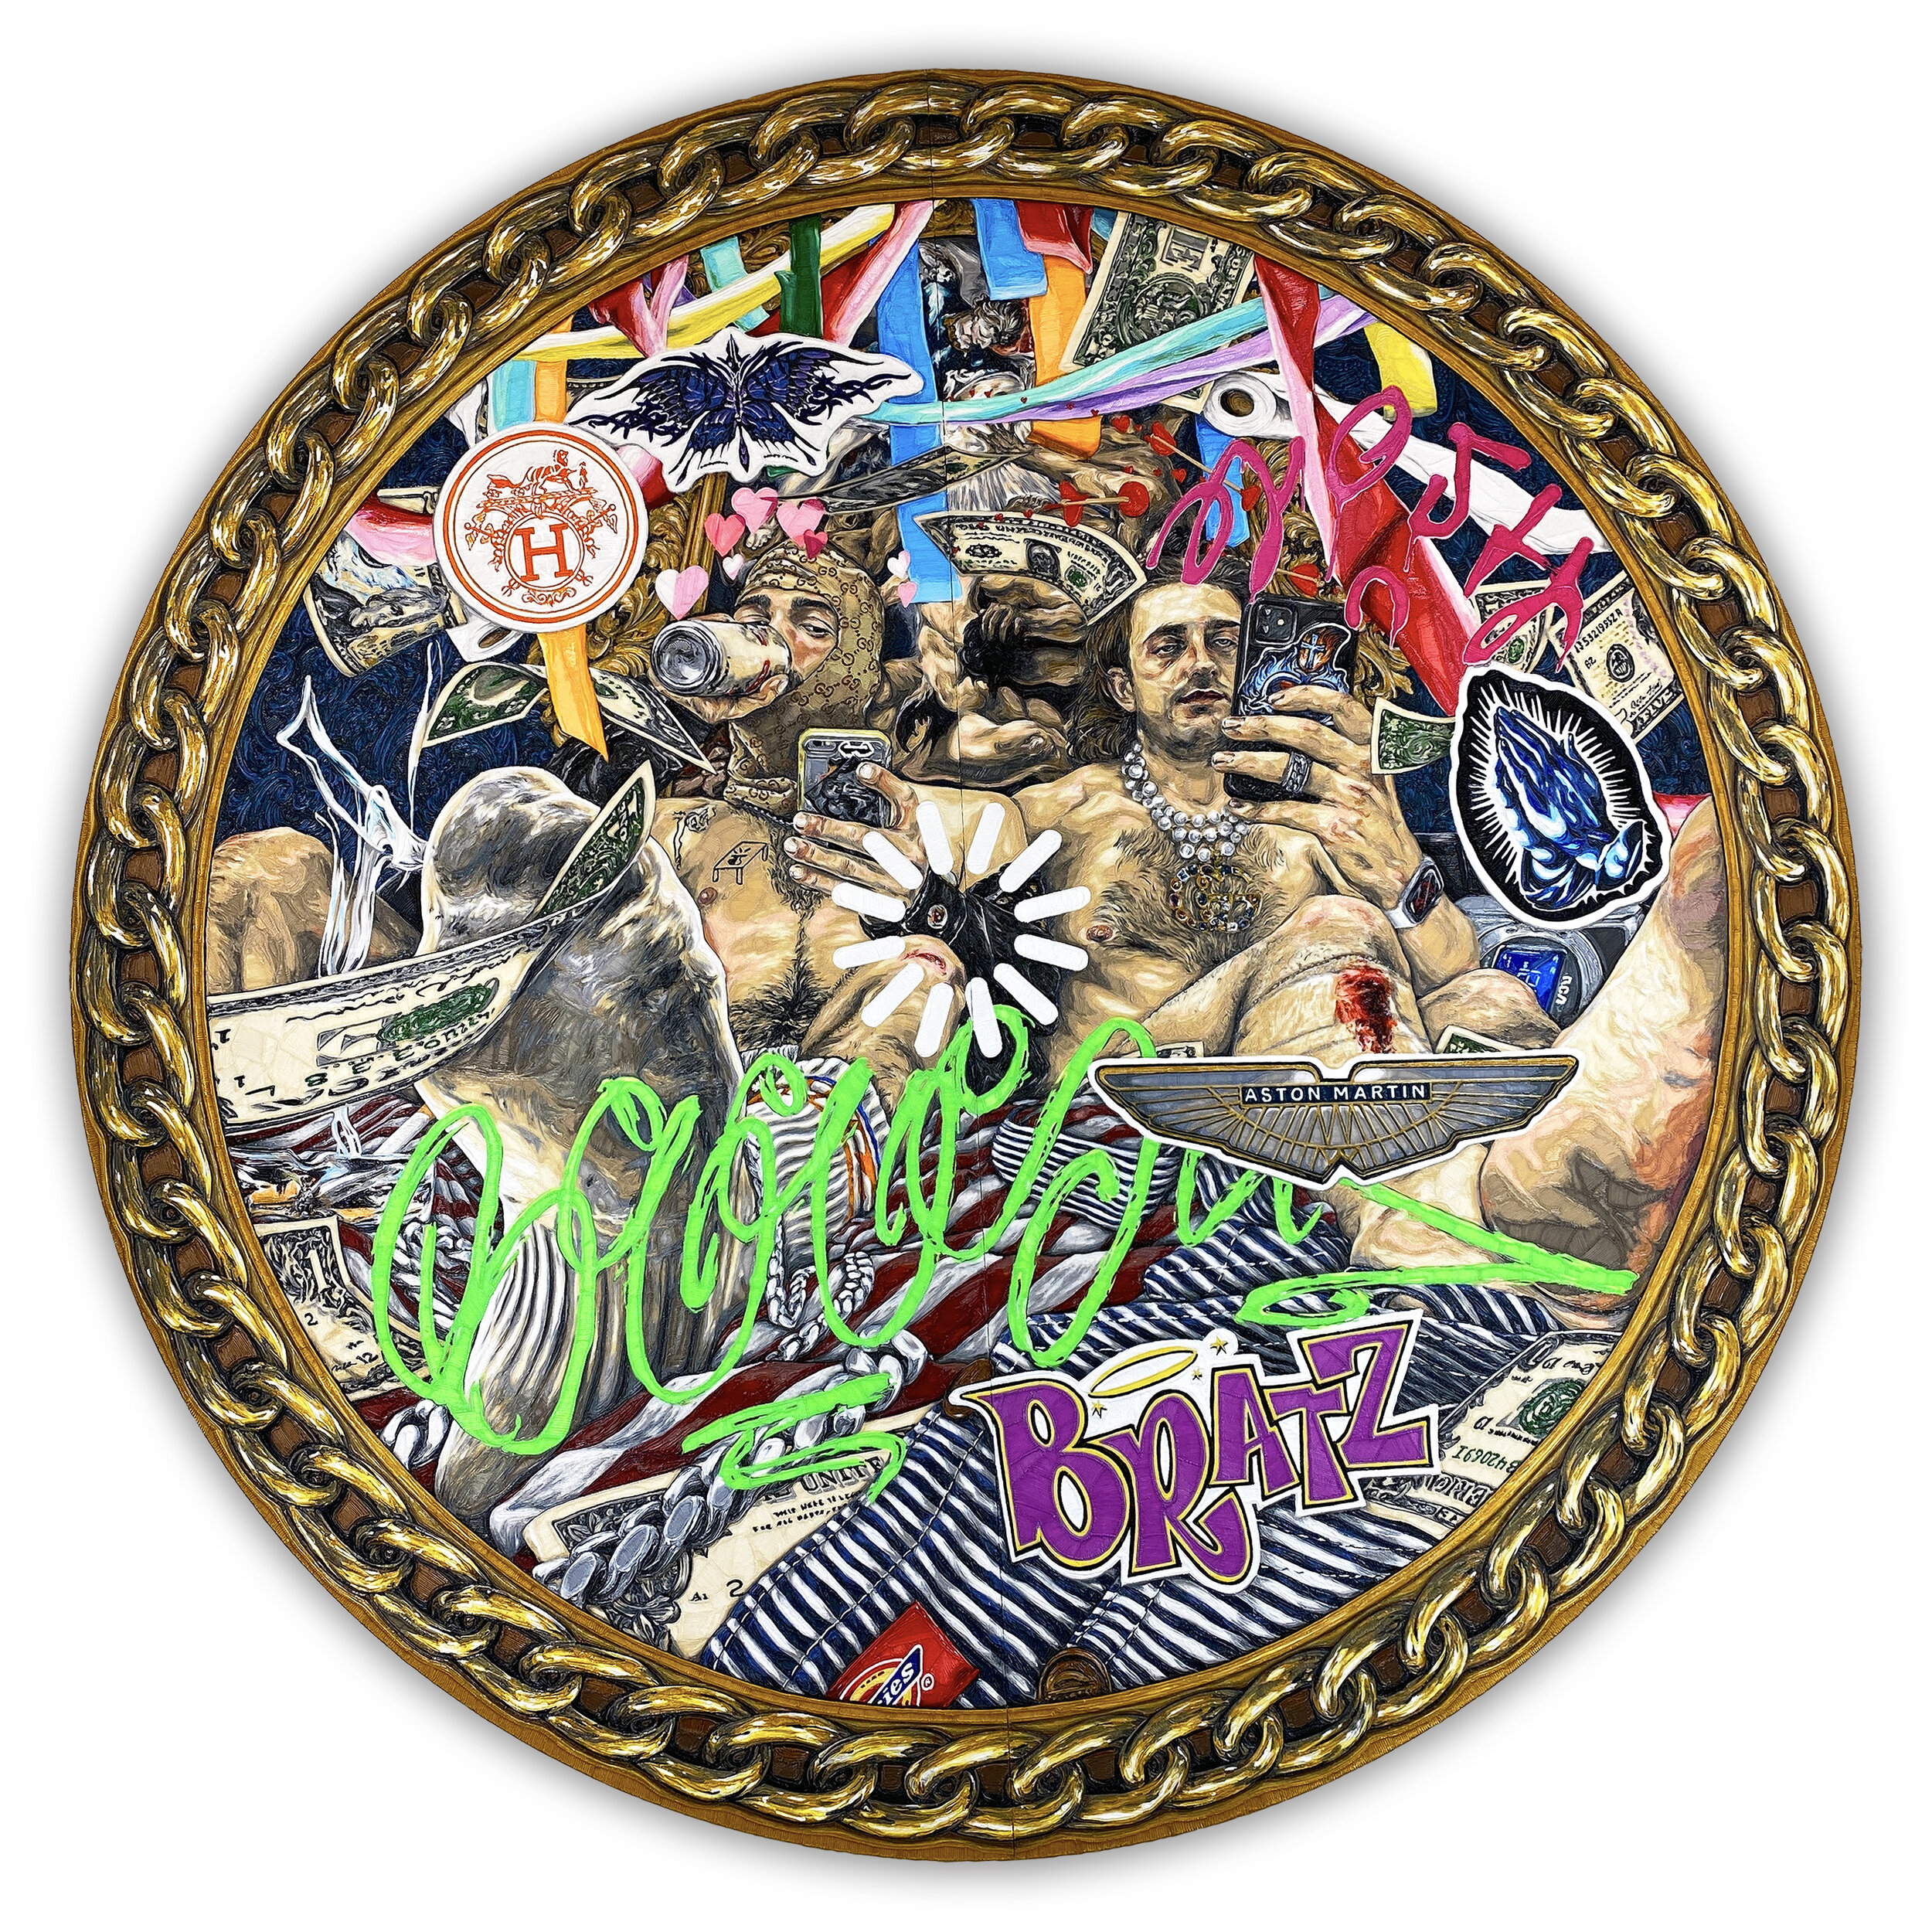  BOYZ OF THE WILD, 2020  73 inches in diameter, PLA on panel 